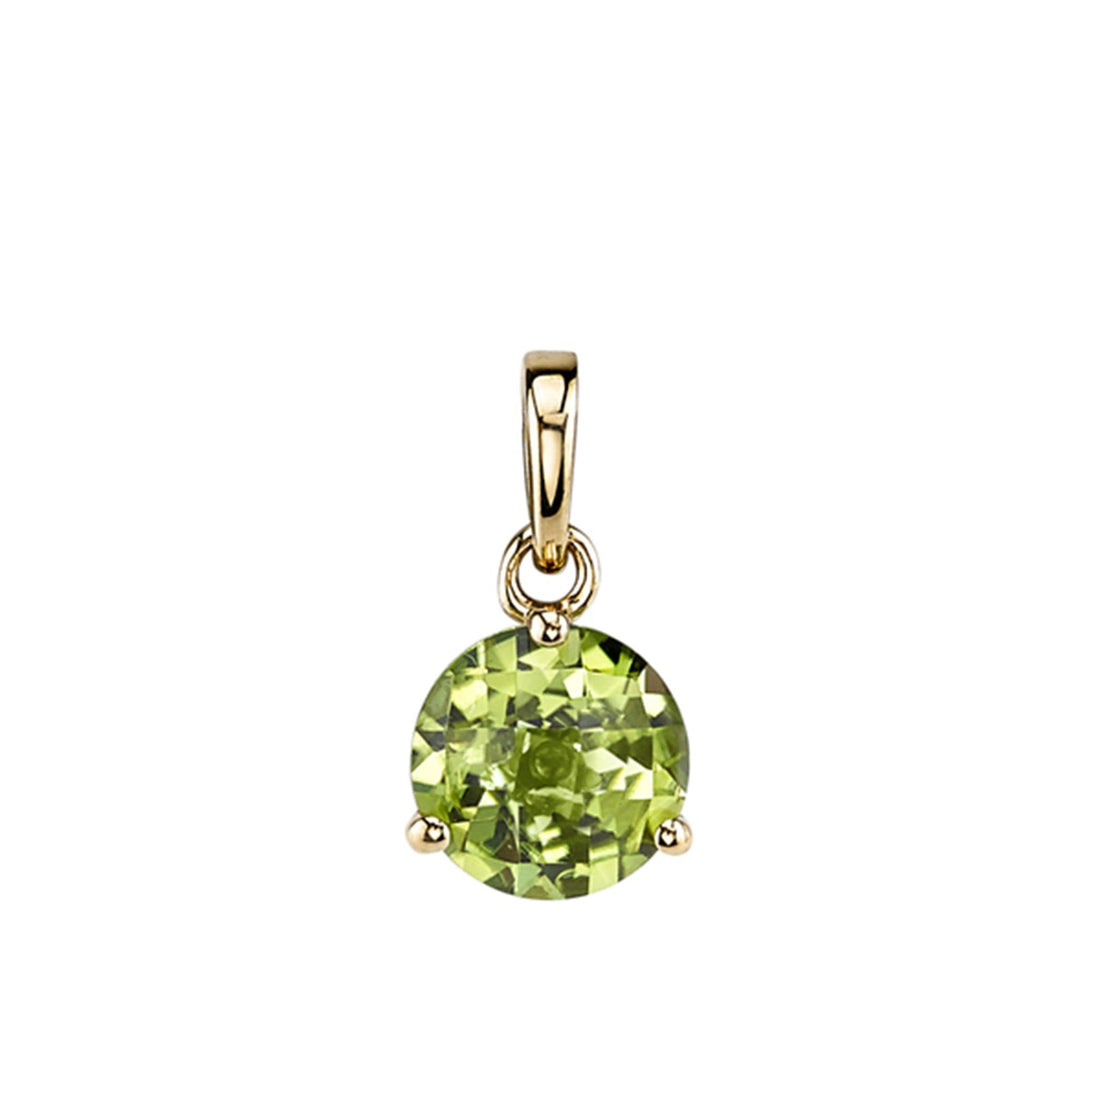 Peridot Gold Pendant Necklace by Stanton Color Yellow Gold